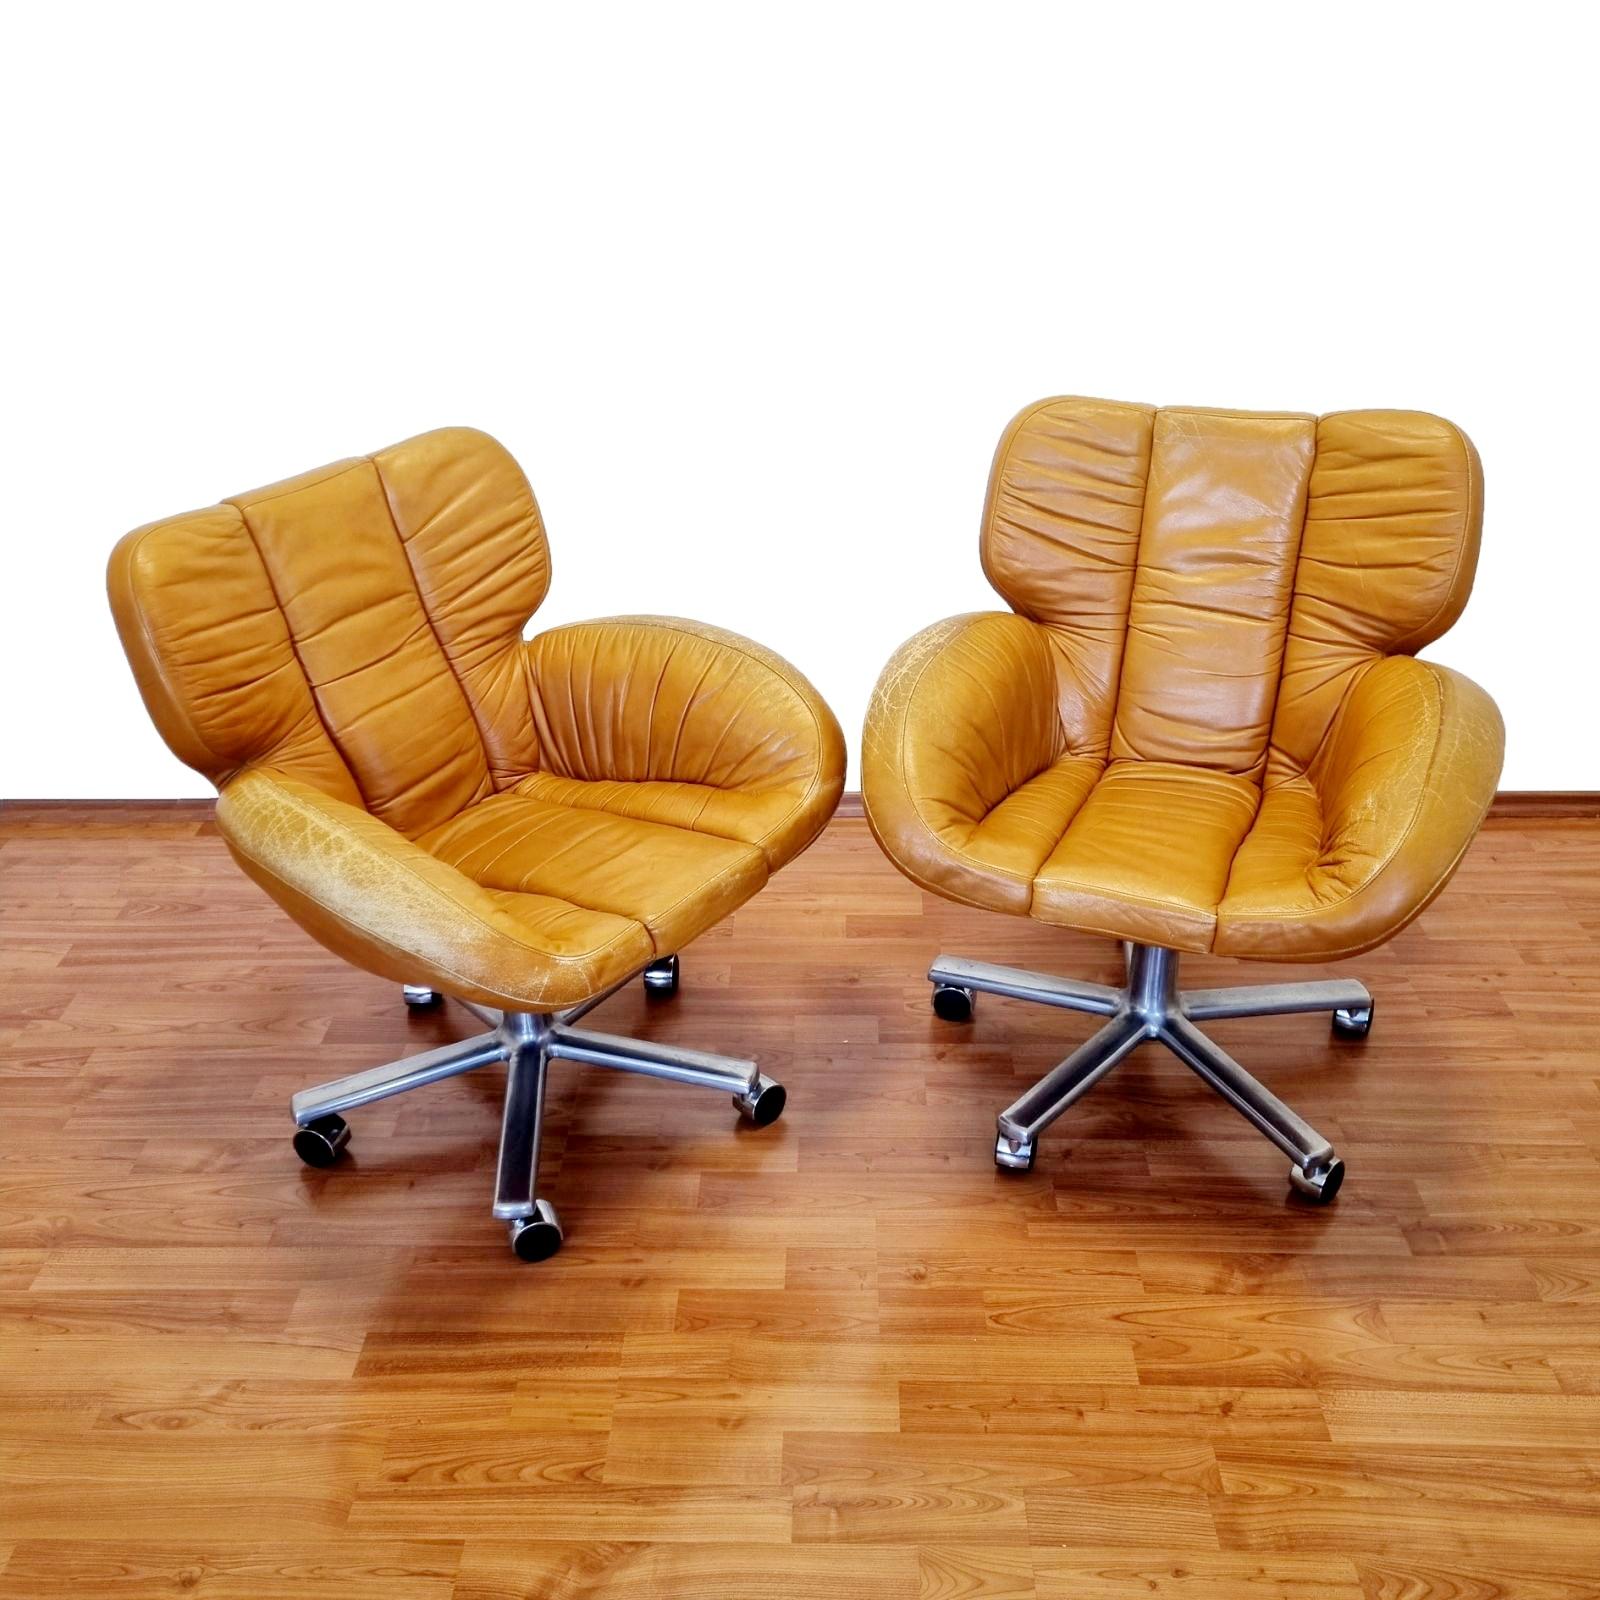 This pair of leather office armchairs were made Italy in the 70s.
Also can be used as a lounge armchairs.
Both in very good condition with well preserved original leather upholsting. They show signs of use and age, all visible on the